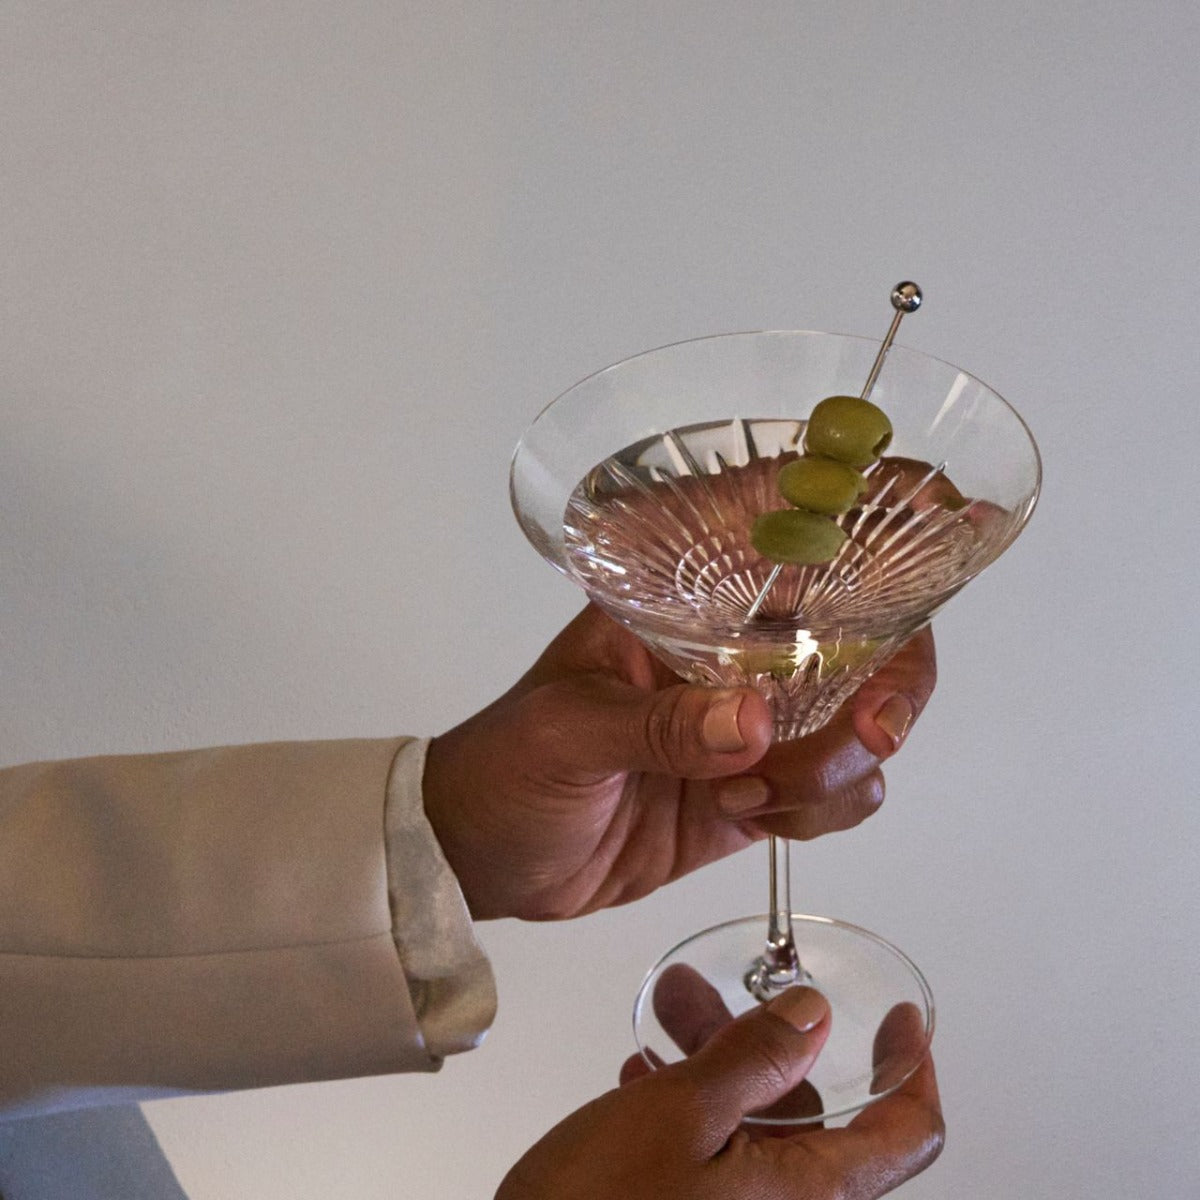 Waterford Crystal Lismore Diamond Martini Glasses Pair  The Lismore Diamond pattern is a strikingly modern reinvention of the Waterford classic, characterized by intricate diamond cuts rendered in radiant fine crystal. 